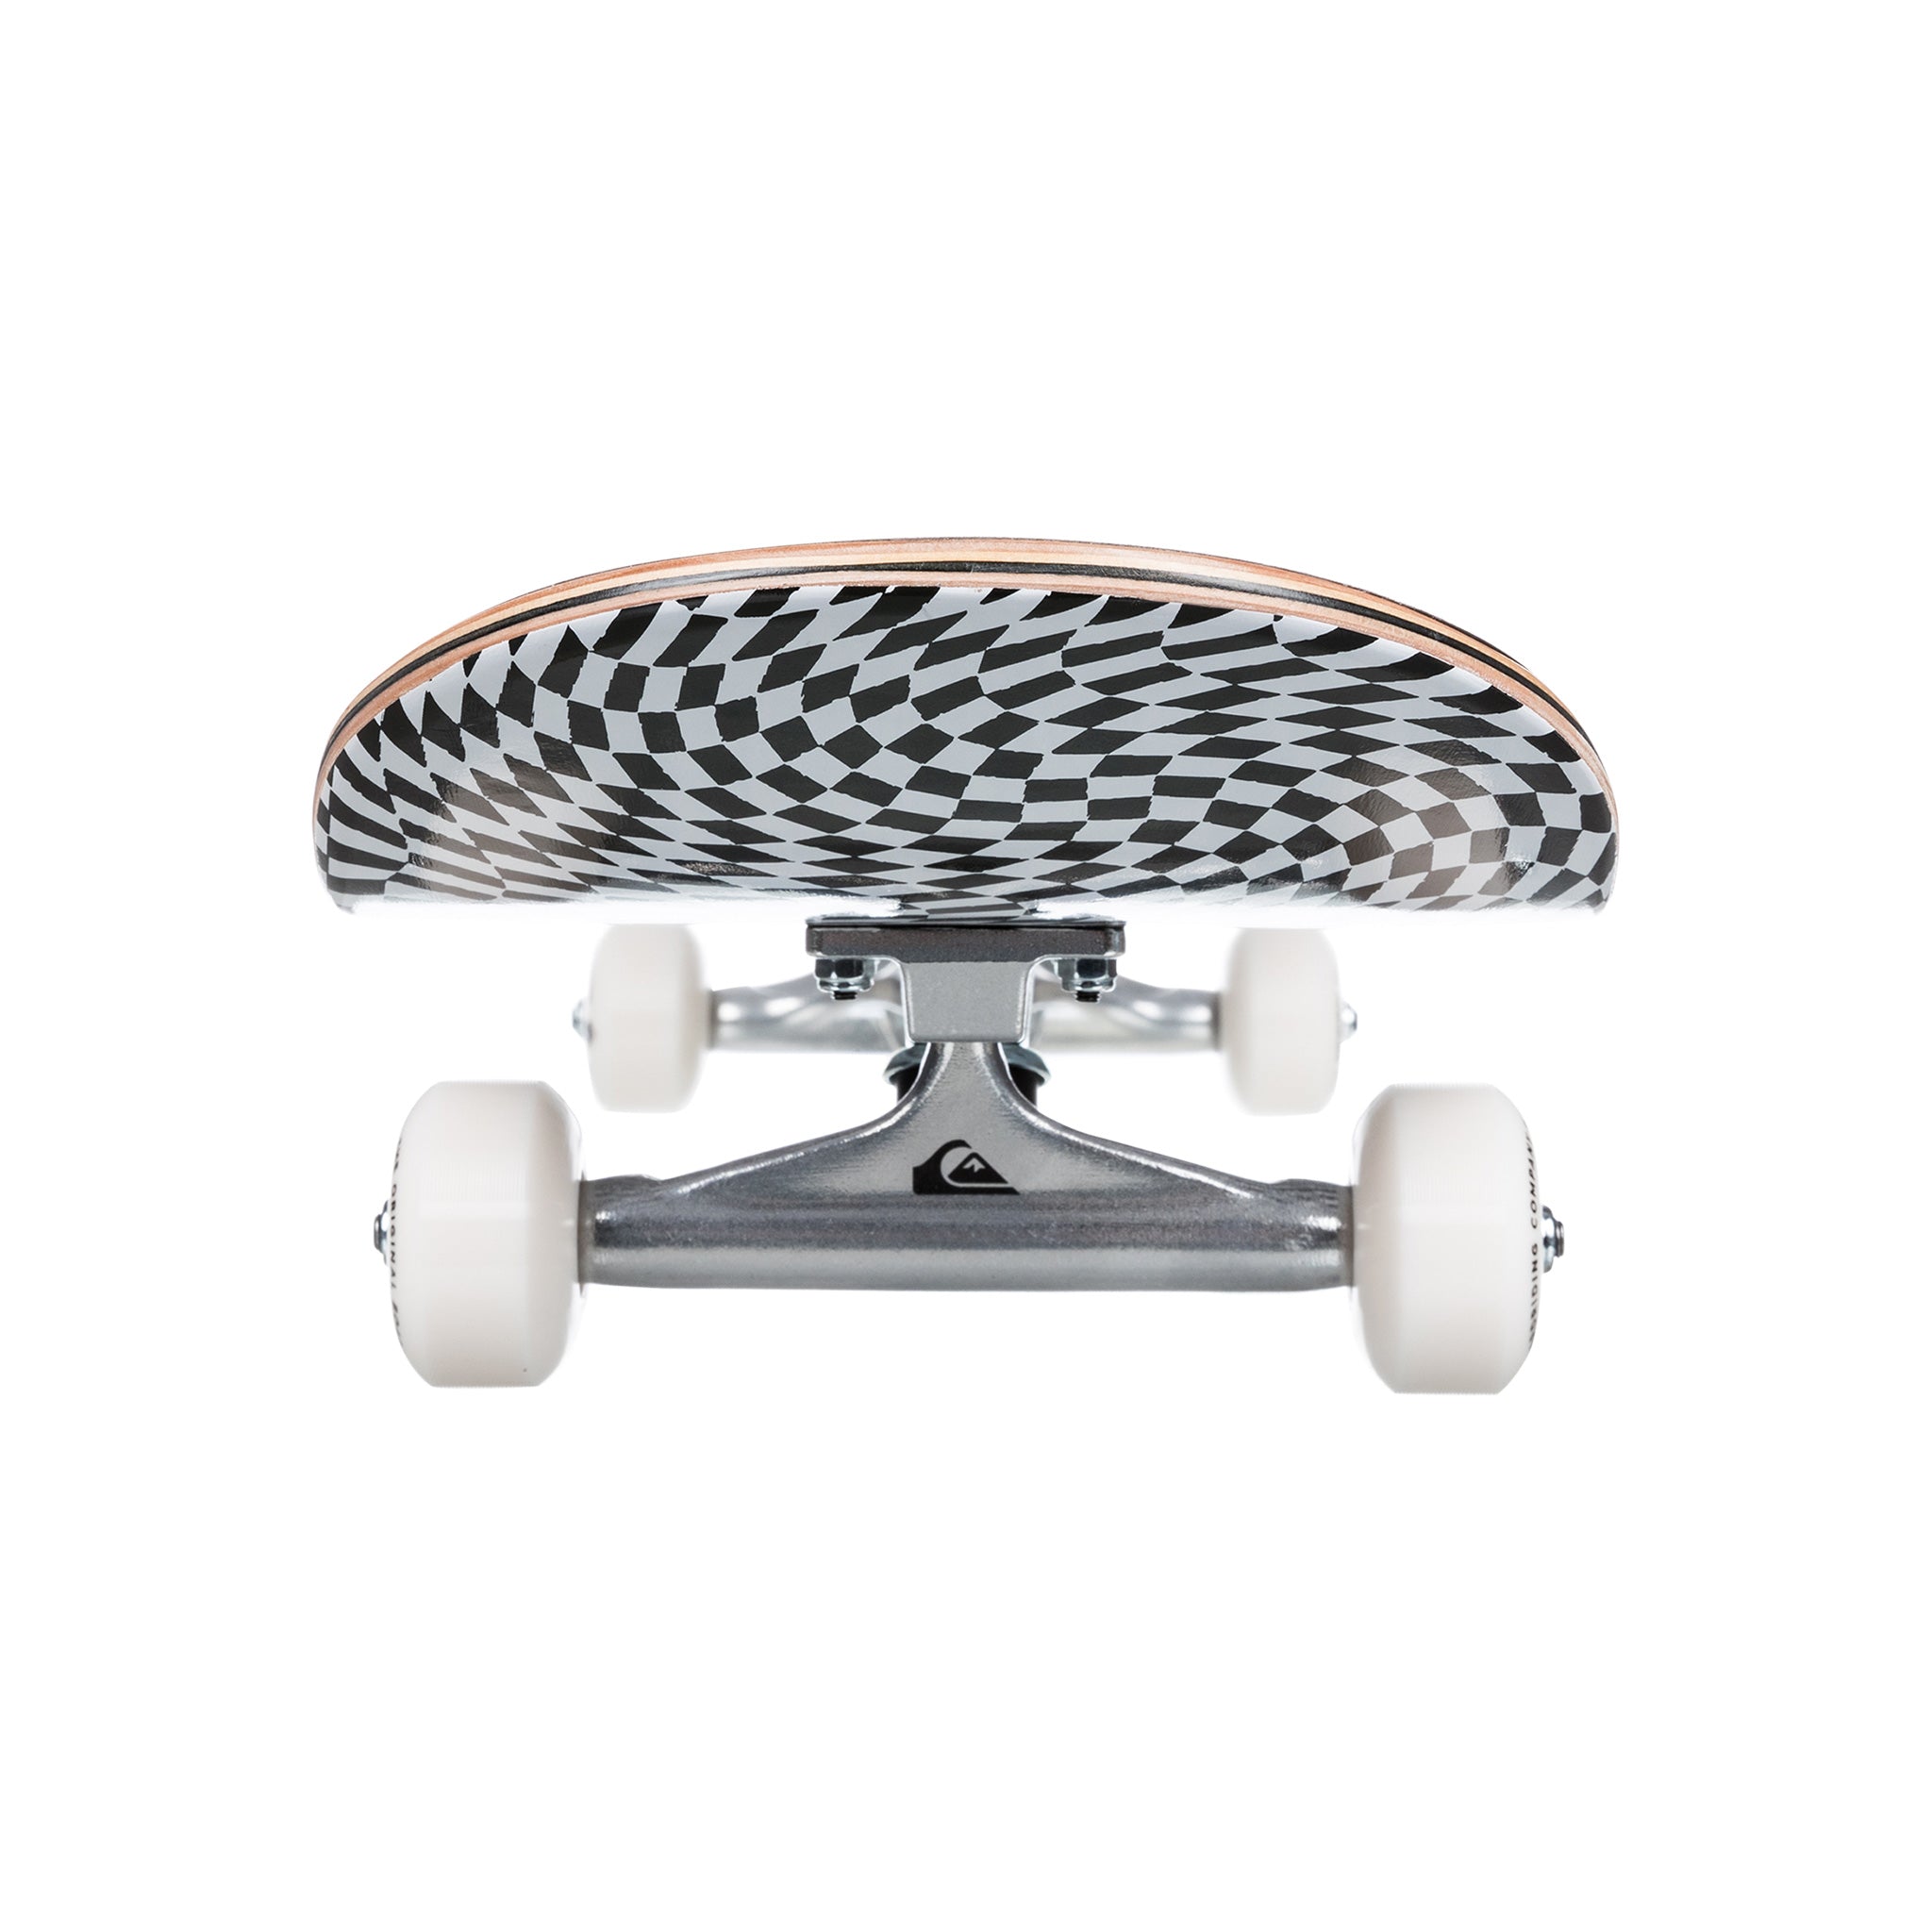 Quiksilver Skateboard Psyched Sun